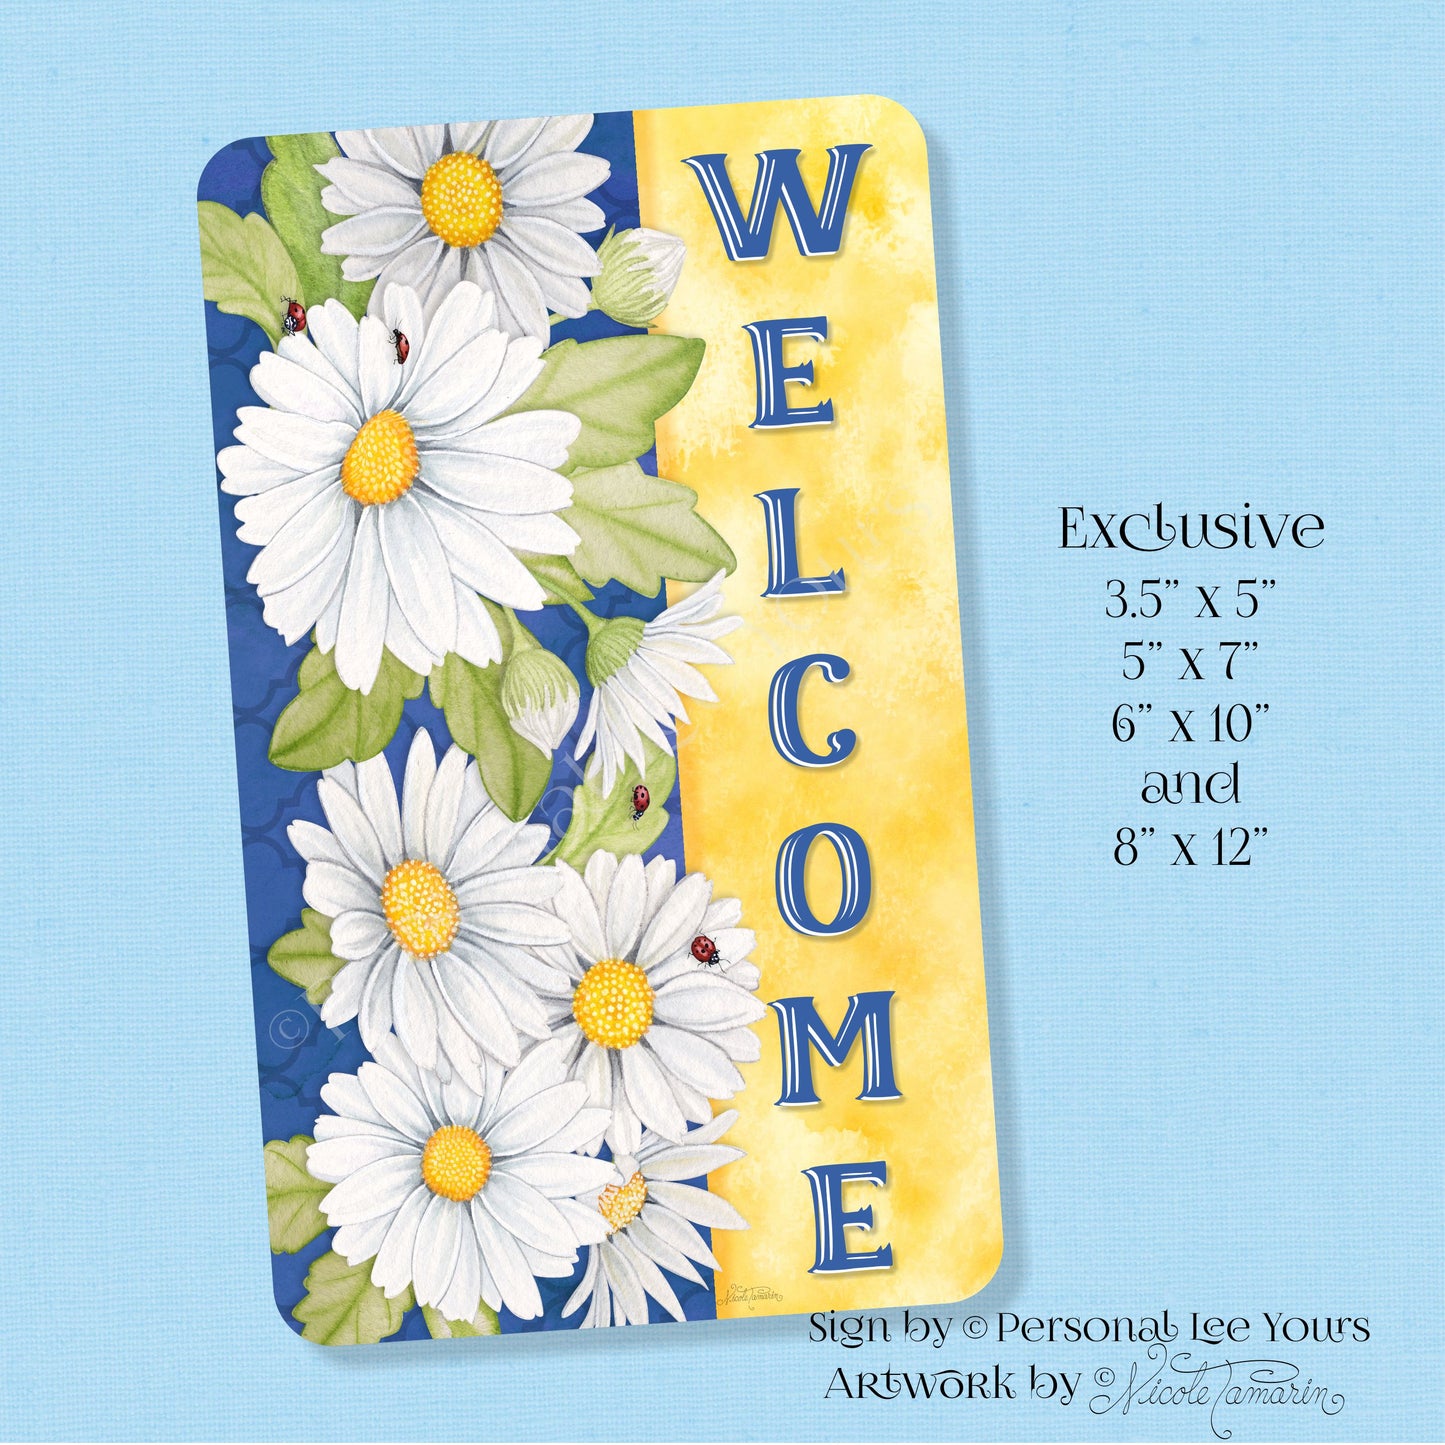 Nicole Tamarin Exclusive Sign * Refreshing Daisies Welcome * Vertical * 4 Sizes * Lightweight Metal